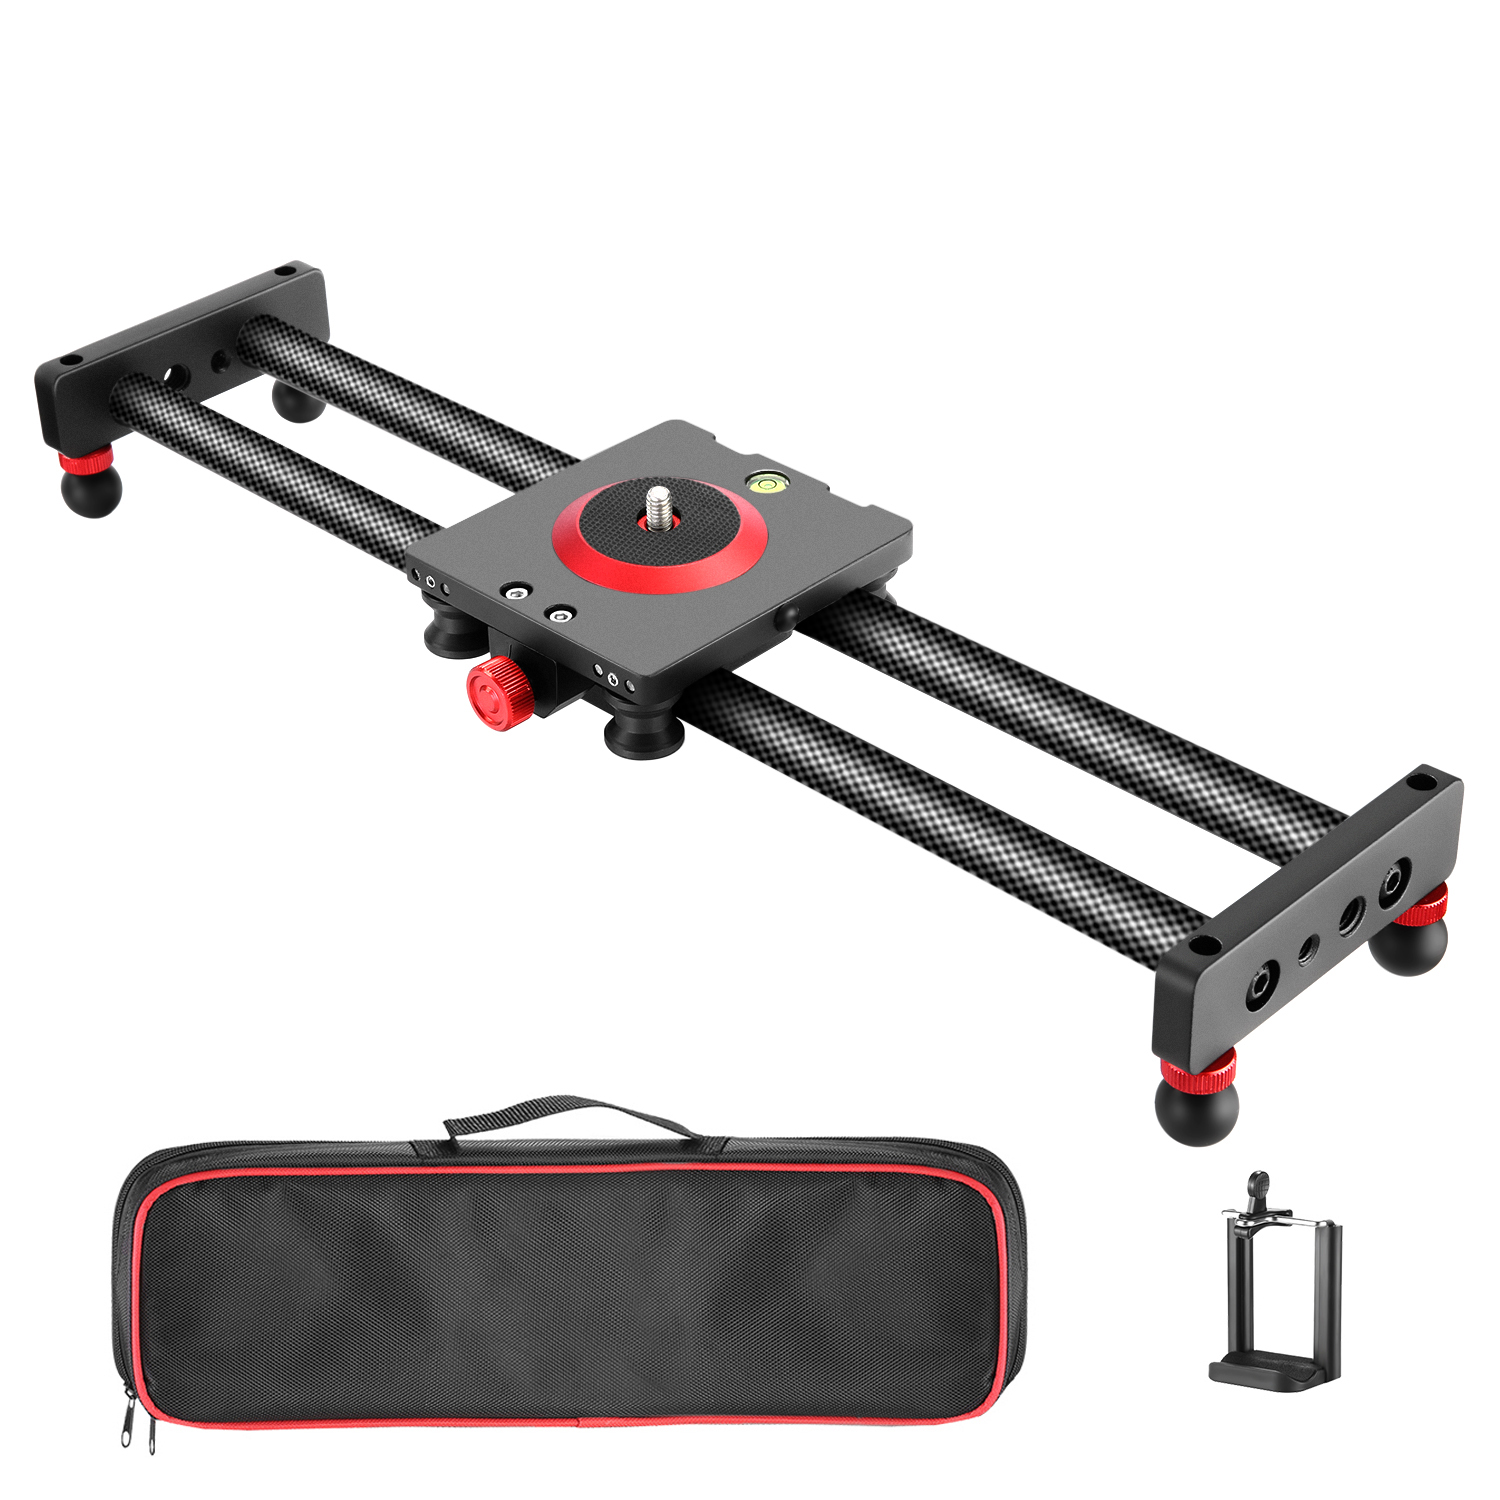 Neewer Camera Slider Carbon Fiber Dolly Rail with 4 Bearings for Smartphone Nikon Canon Sony Camera 12lbs Loading